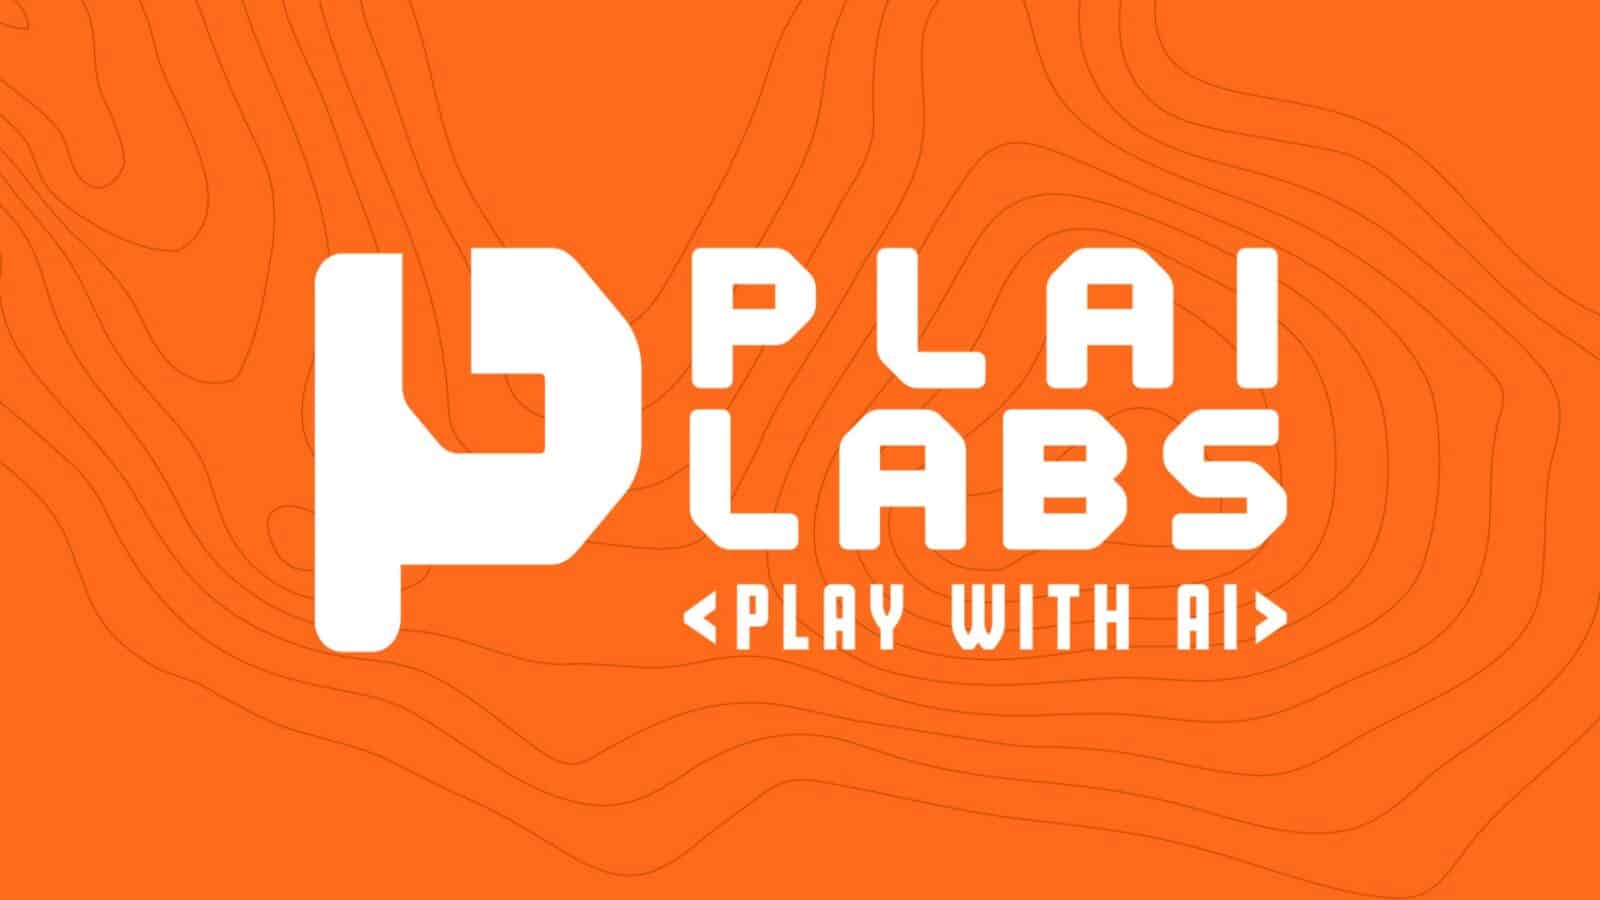 Plai Labs, a company that builds social platforms for Web3, unveiled that it secured M from famous venture capital firm A16z or Andreessen Horowitz.